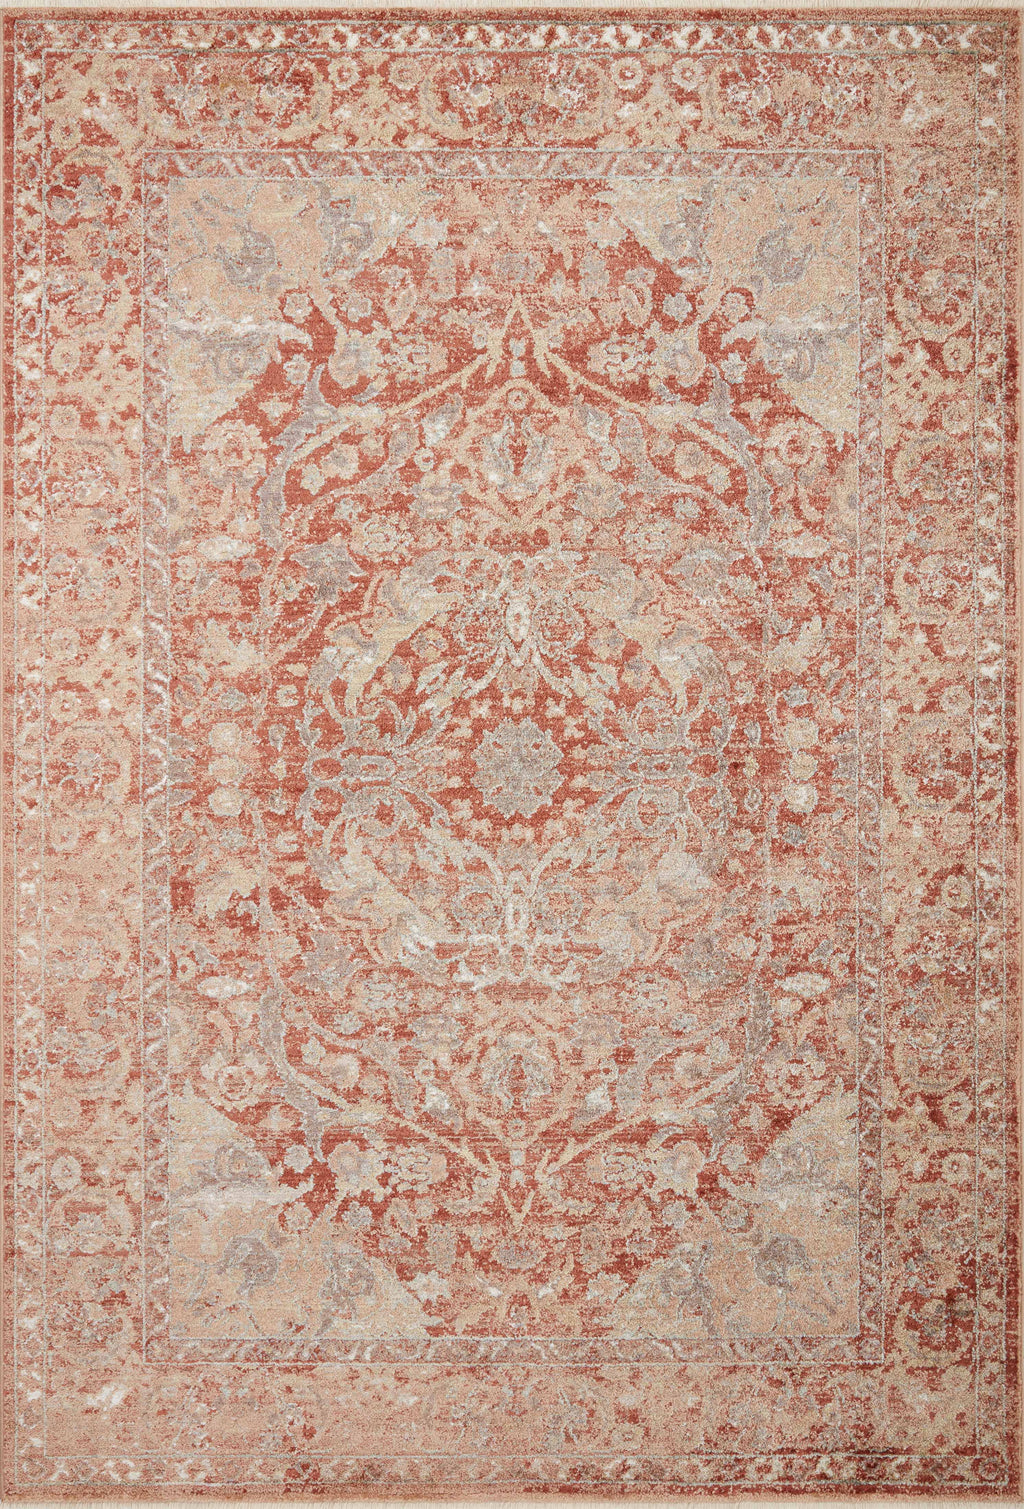 Sonnet Collection Rug in Spice / Multi Red sample Power-Loomed Polypropylene/Polyester